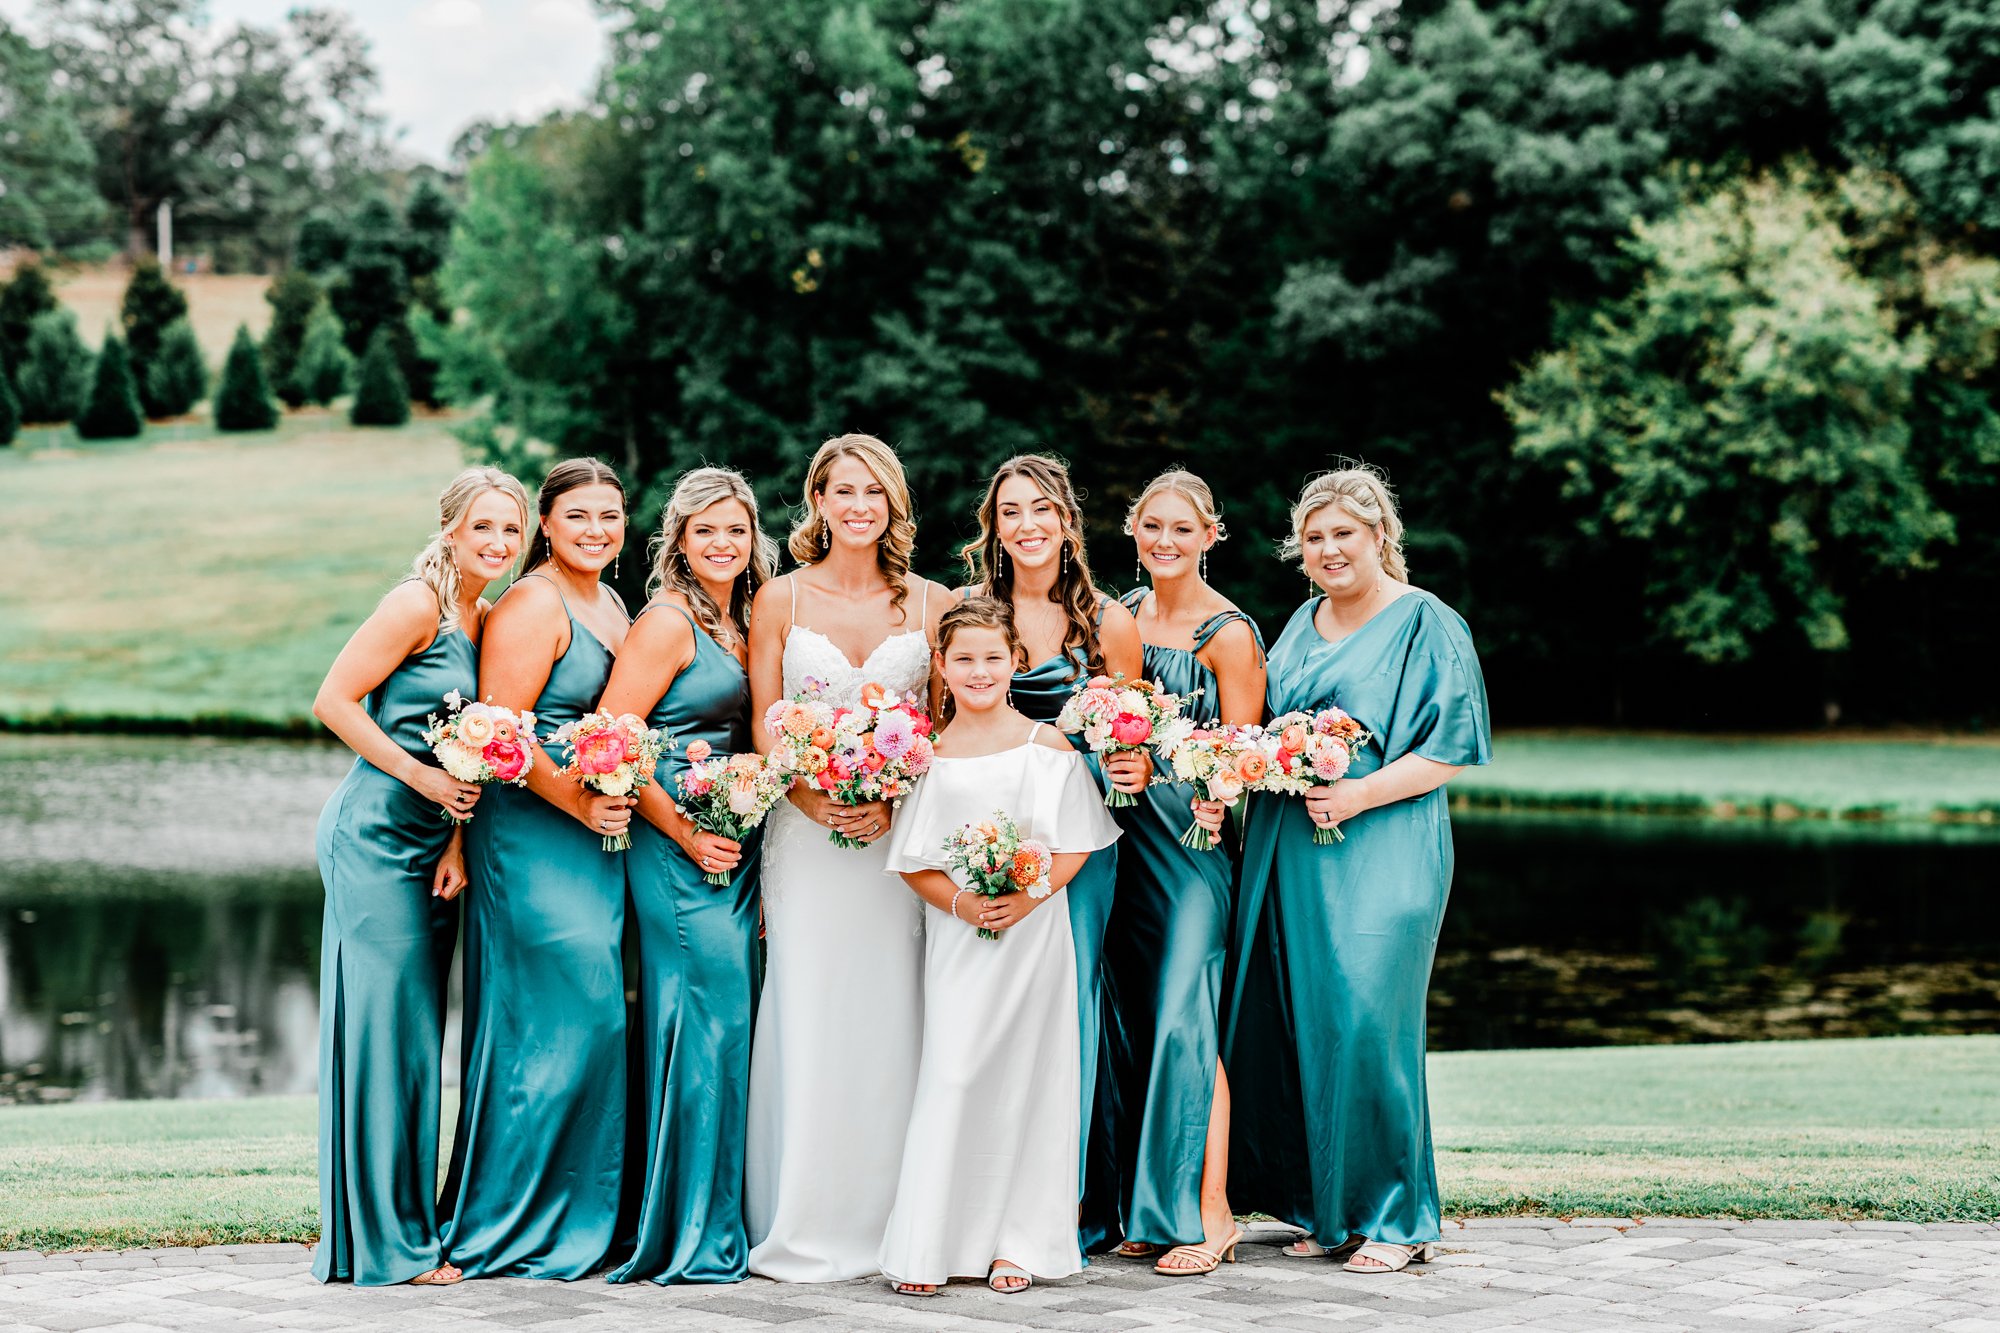 Greenville Sc Weding Day Timeline - photos with bridesmaids-1-4.jpg